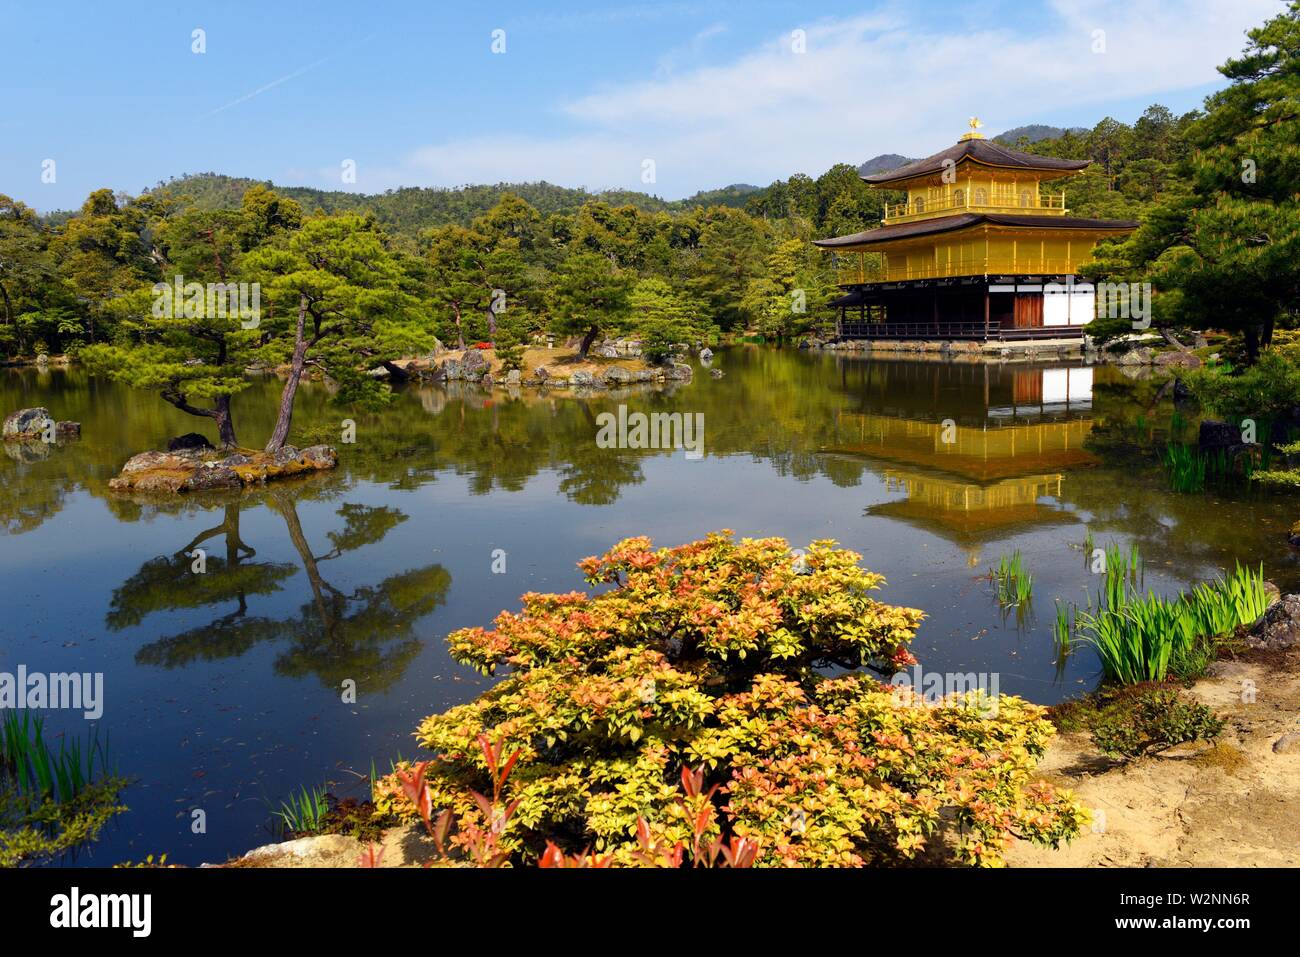 Kinkaku-ji, the temple of the Golden Pavilion, is famous Zen Buddhist temple located in Kyoto, Japan, Asia. Stock Photo